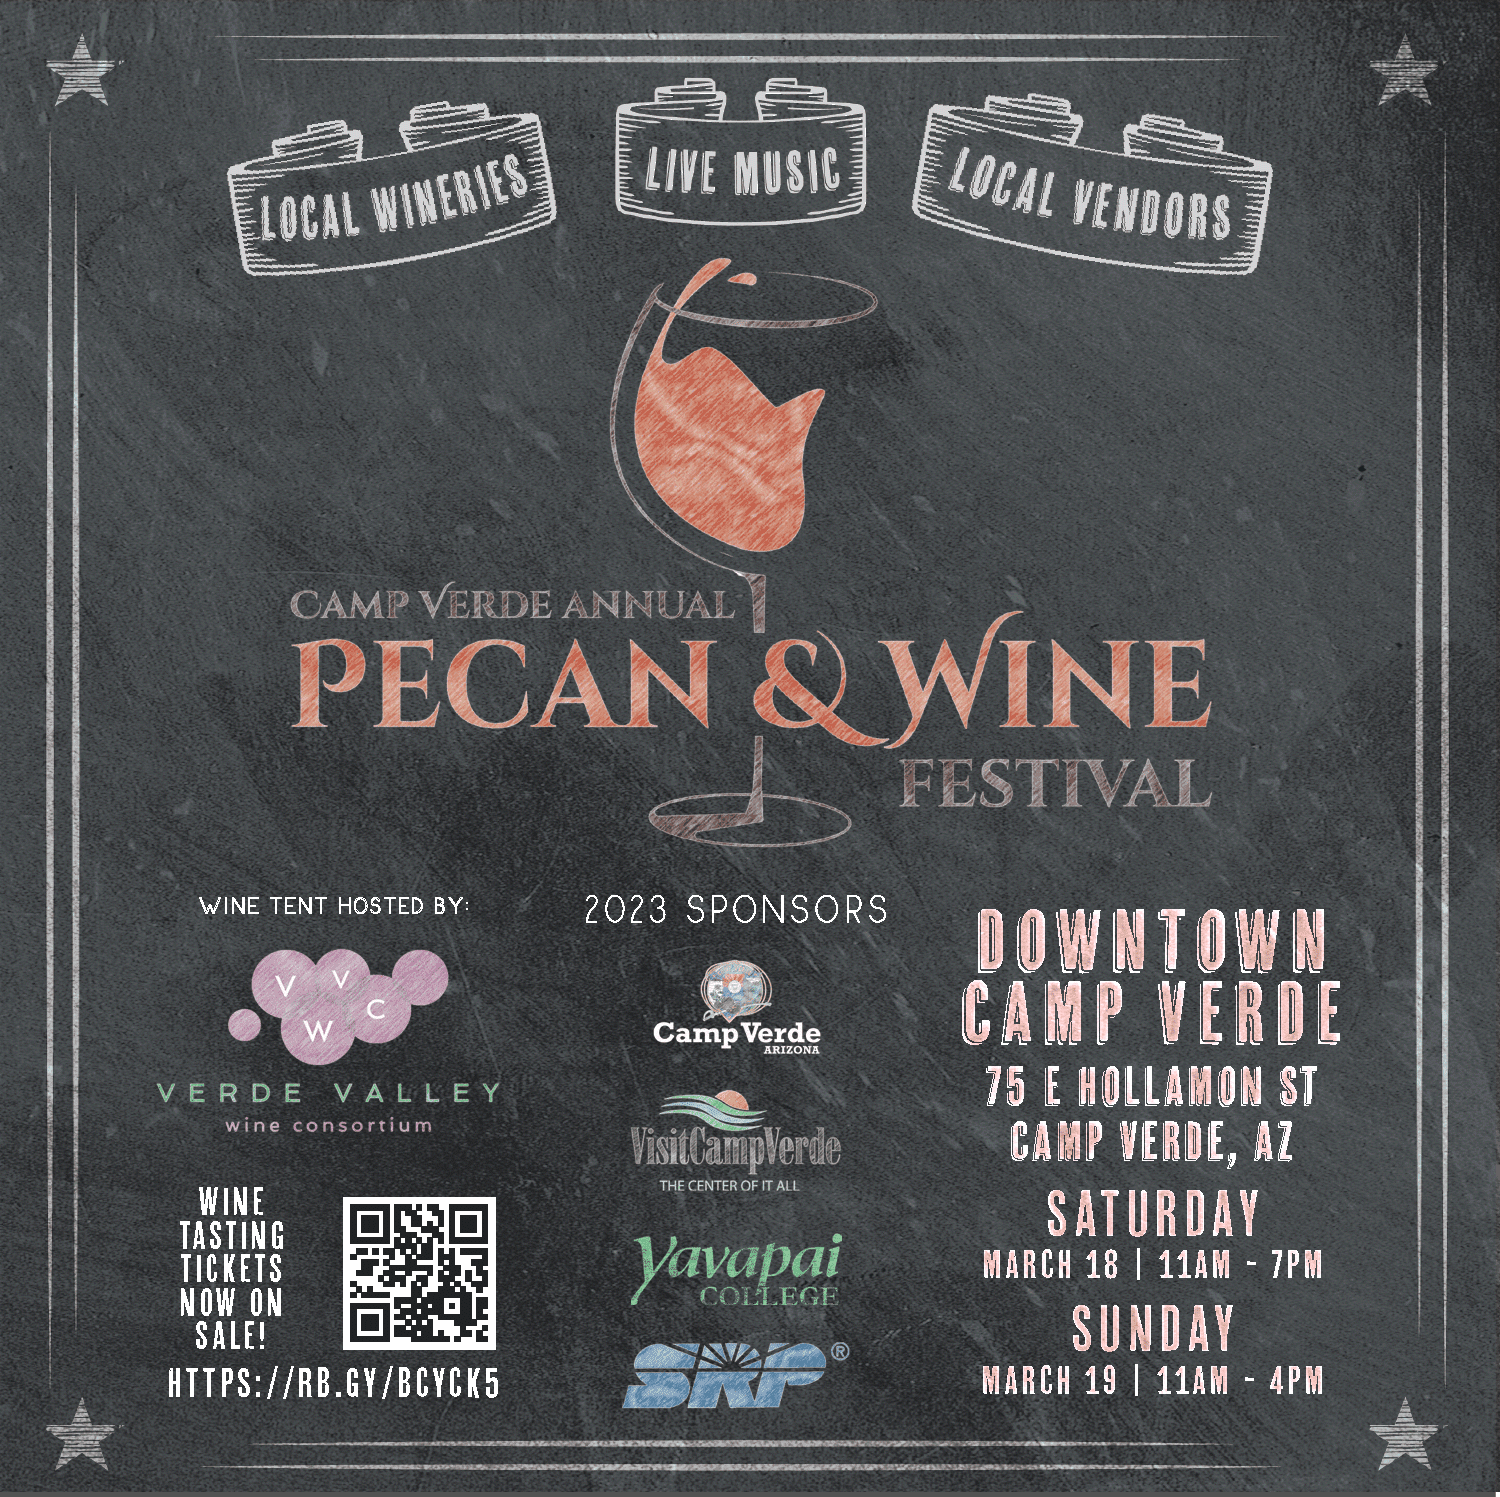 22nd Annual Camp Verde Pecan & Wine Festival Returns to Downtown Camp Verde March 18-19, 2023